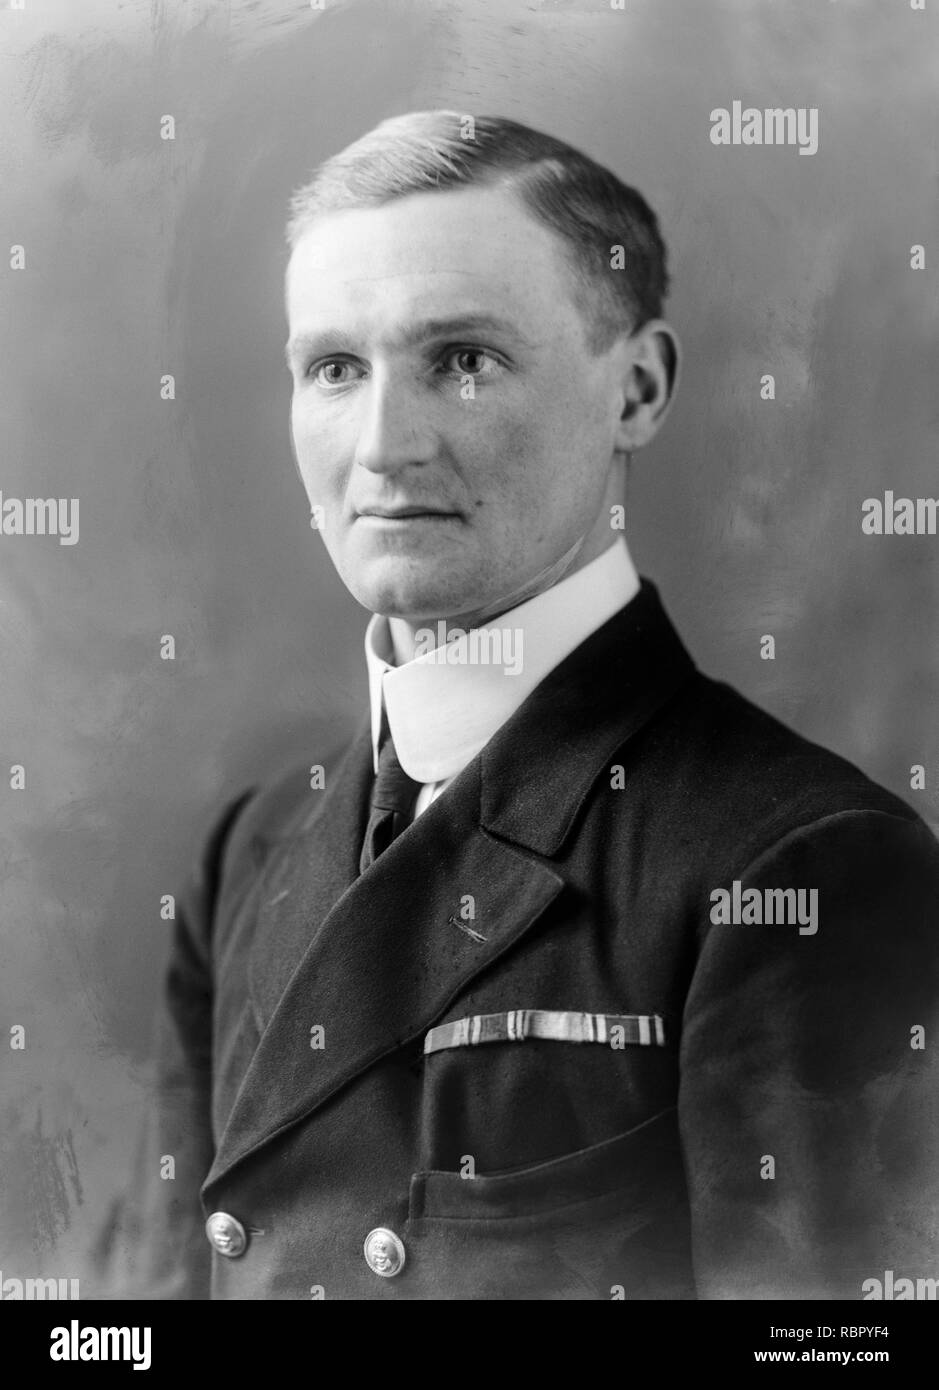 Photograph taken on 20th December 1920. Lieutenant Commander Henry Edward Rendall DSO of the British Royal Navy. Randall gained his DSO, or Distinguished Service Order, 'for distinguished services under fire on several occasions' in Russia during 1919. Photograph taken in the famous London Studios of Bassano. Stock Photo